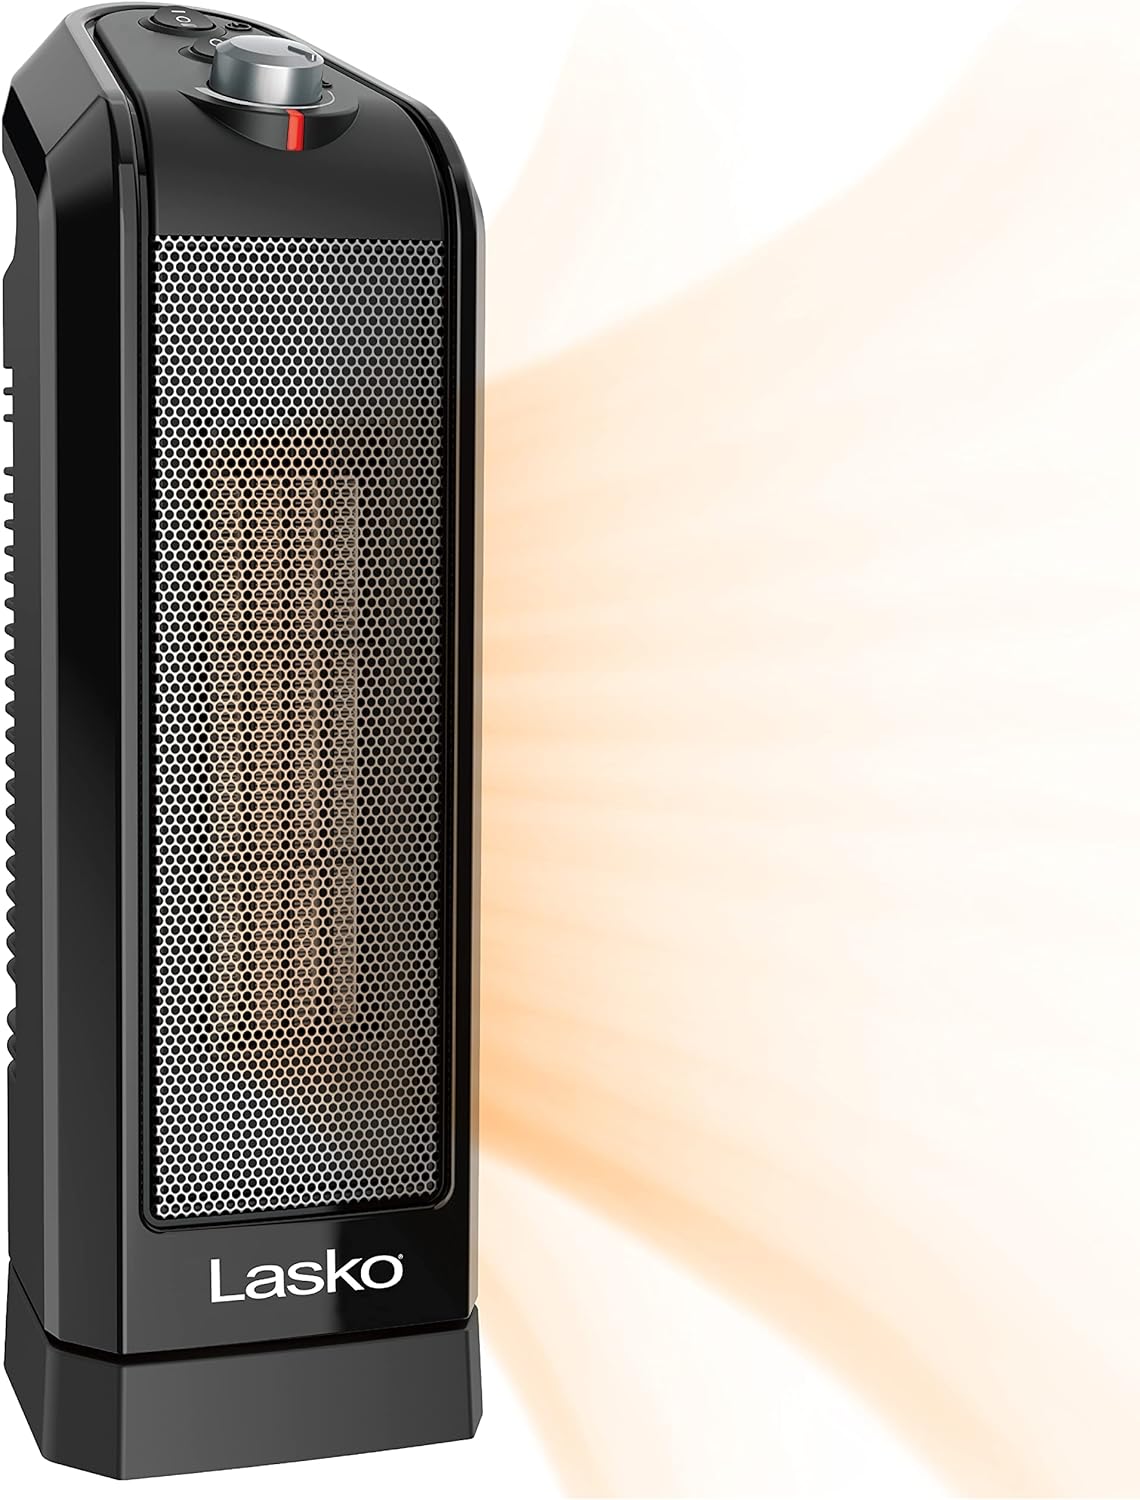 Lasko Oscillating Ceramic Space Heater, Overheat Protection, Thermostat, 3 Speeds, 15.7 Inches (Black) 1500W $34.99 & More+ Free Shipping